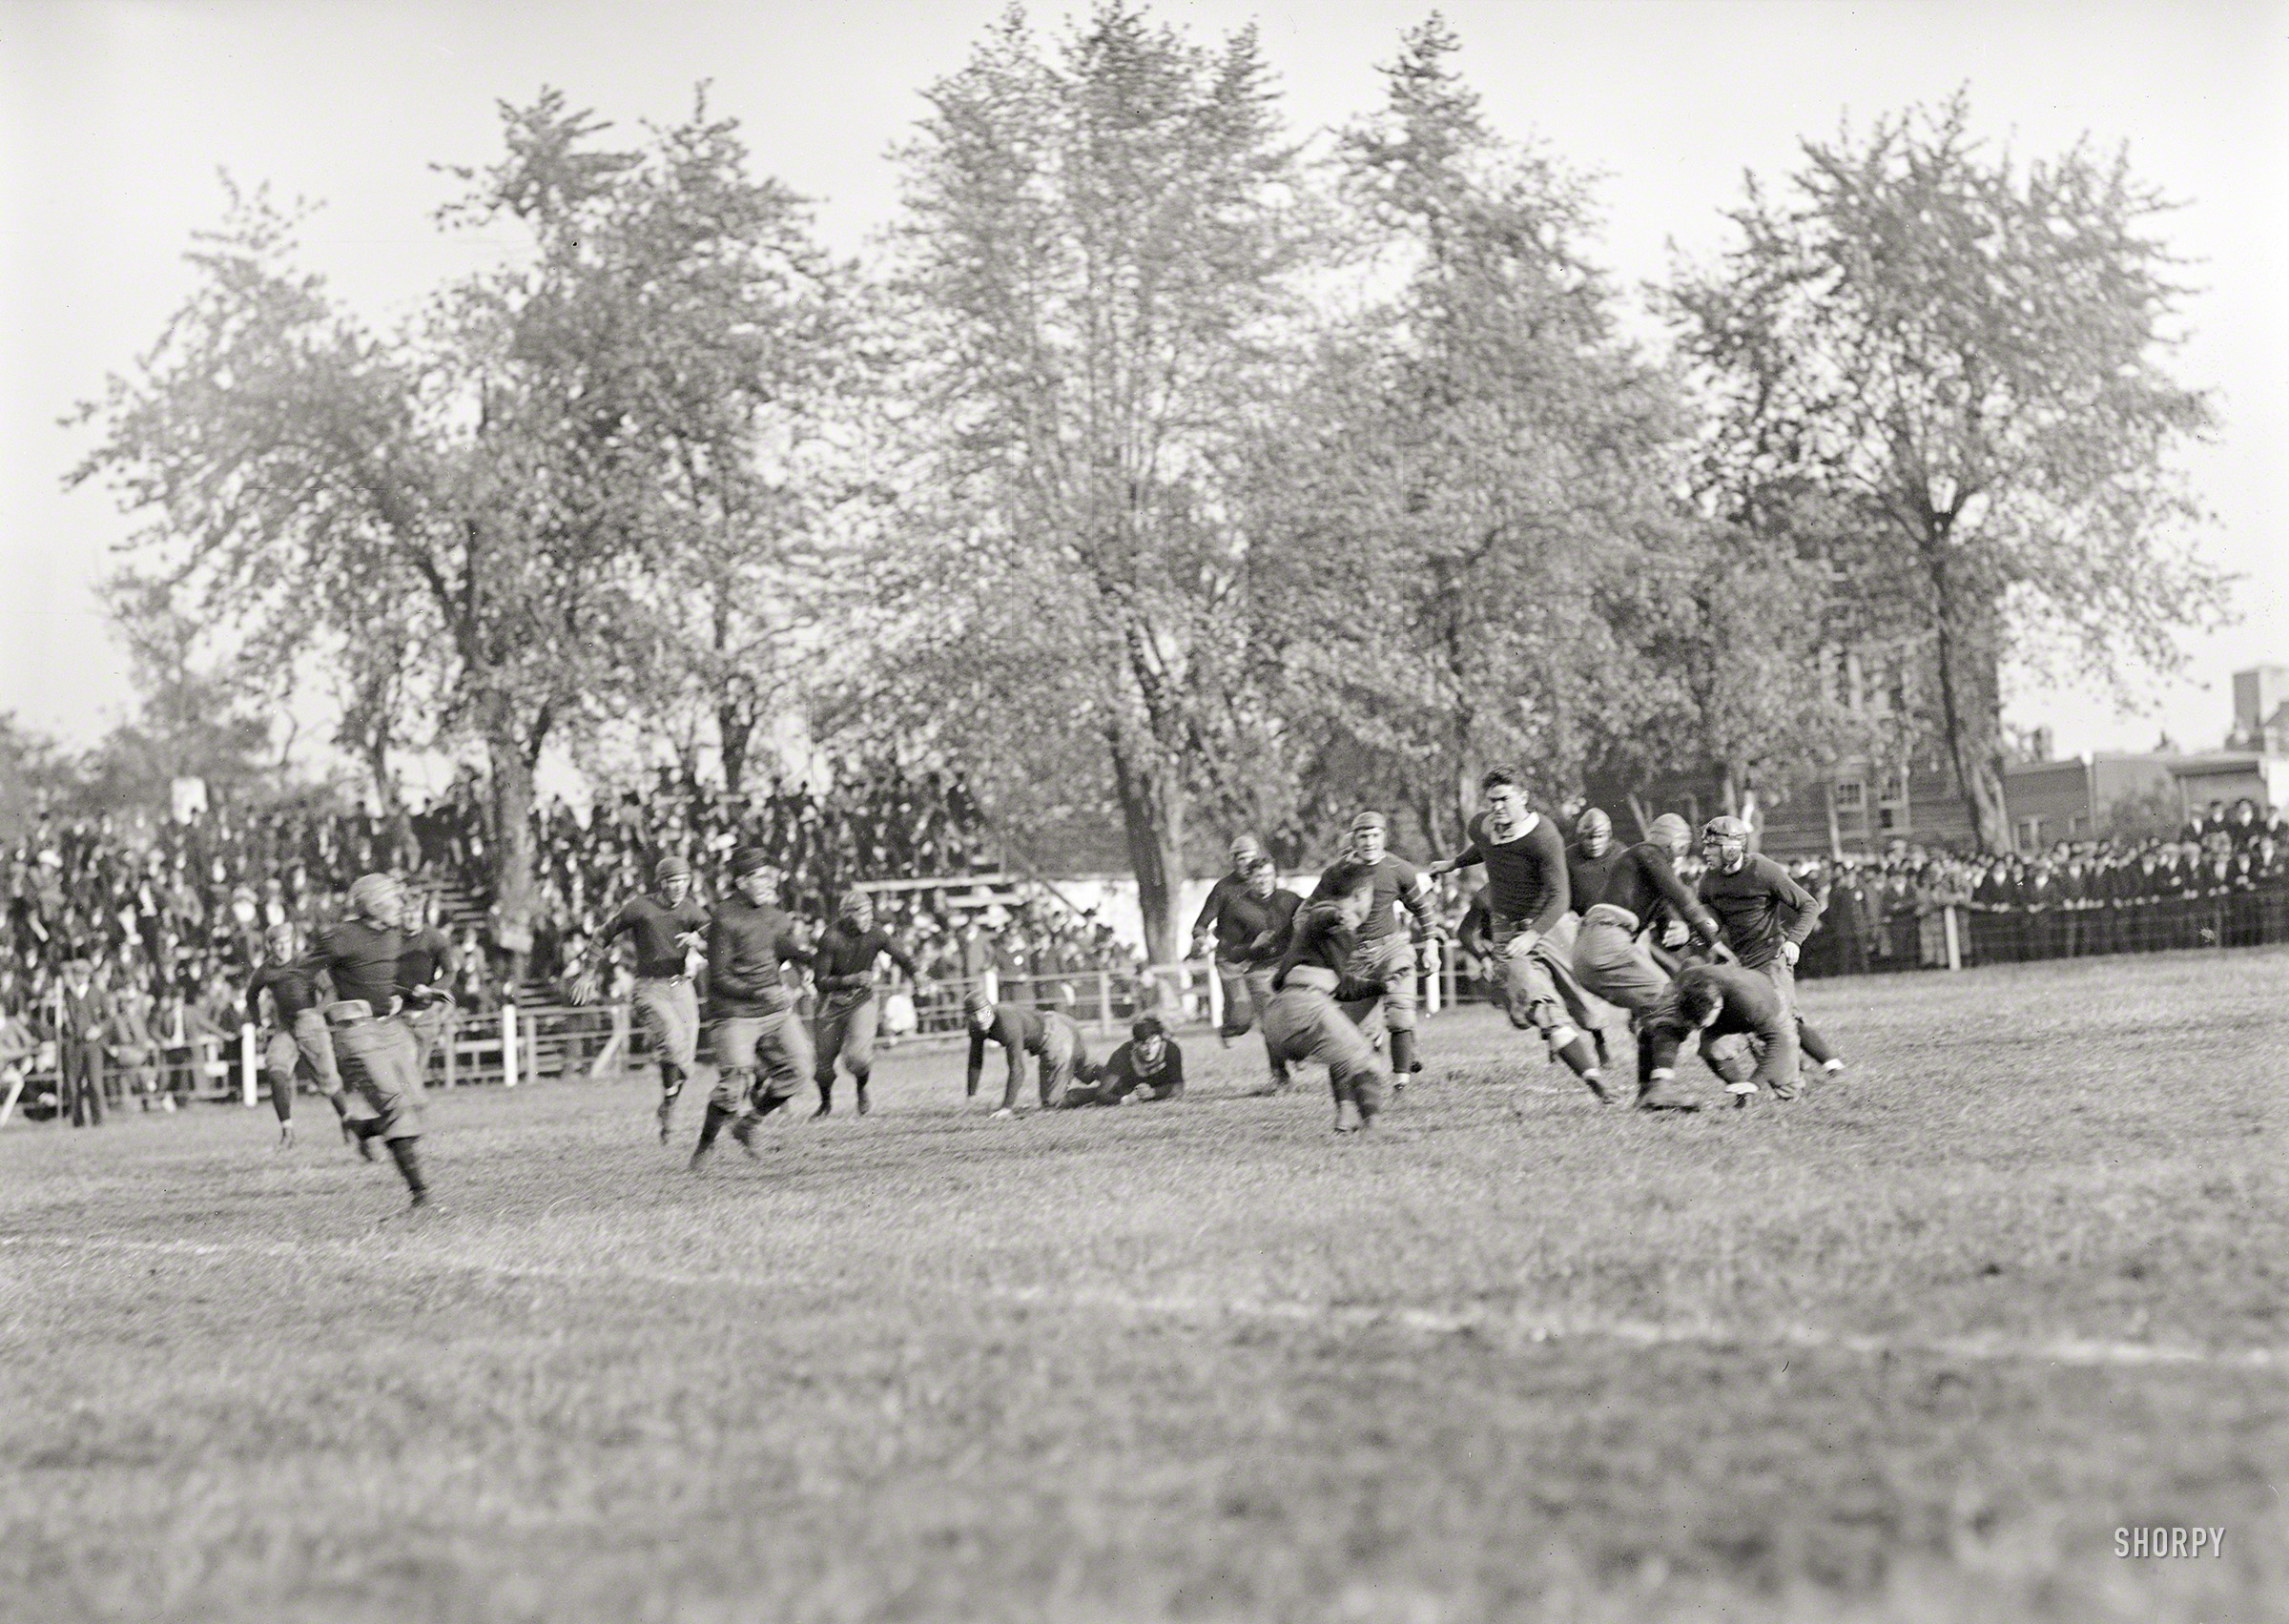 1912. Washington, D.C. "Georgetown-Carlisle game; Glenn Warner." But ... where are the skyboxes? Harris & Ewing Collection glass negative. View full size.